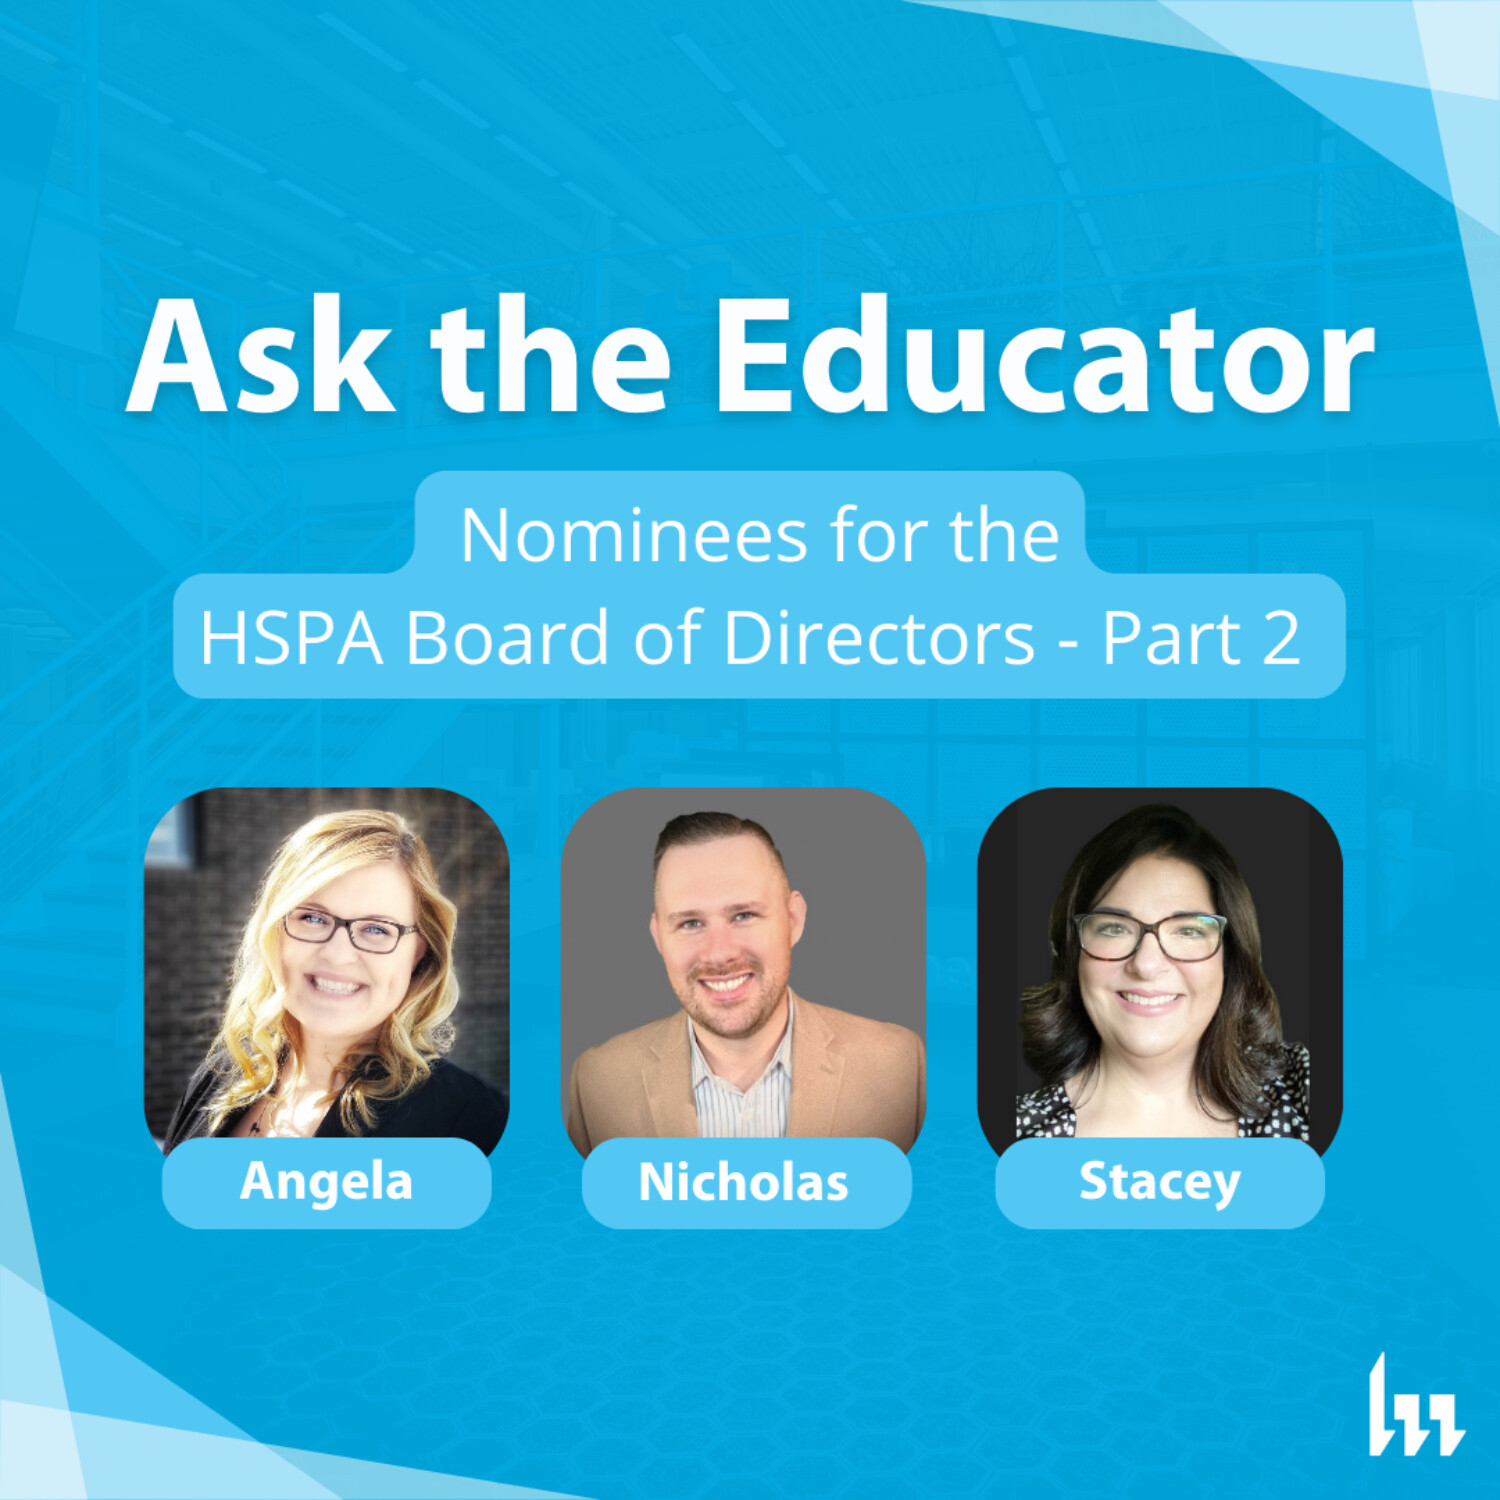 111. Nominees for the HSPA Board of Directors - Angela Warner, Nicholas Day, and Stacey MacArthur